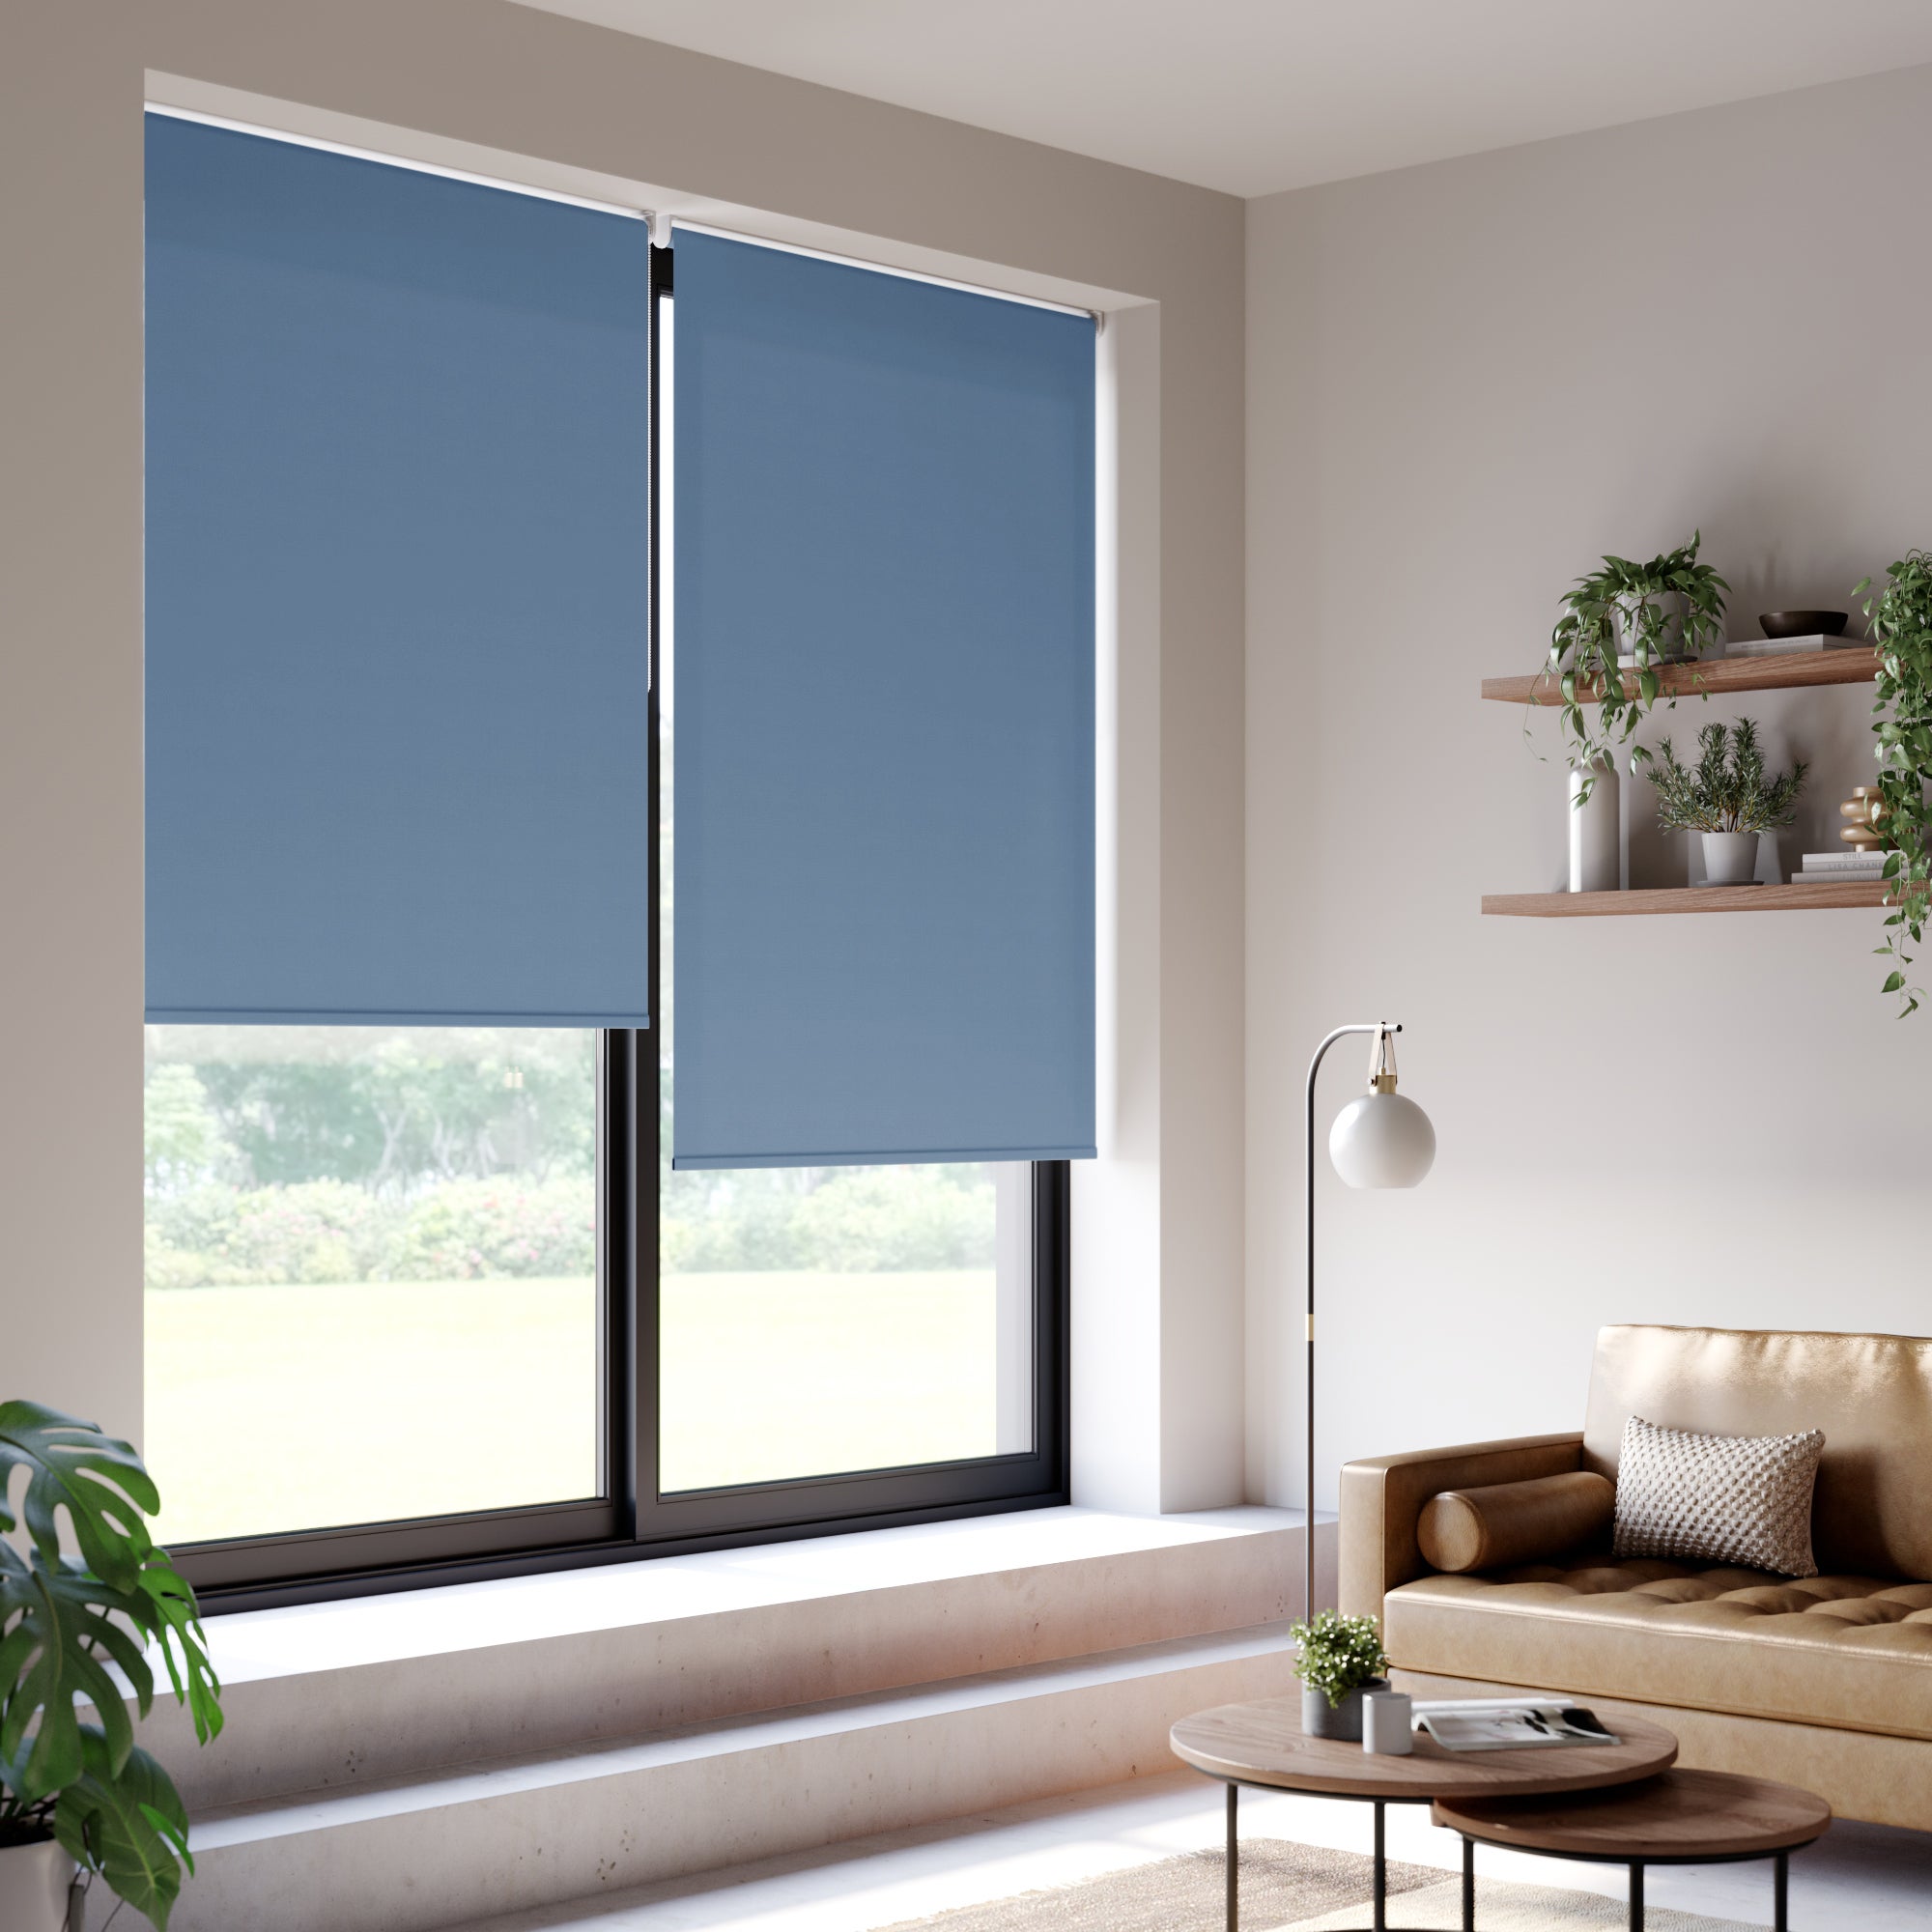 Iona Daylight Made to Measure Flame Retardant Roller Blind Iona Wedgewood